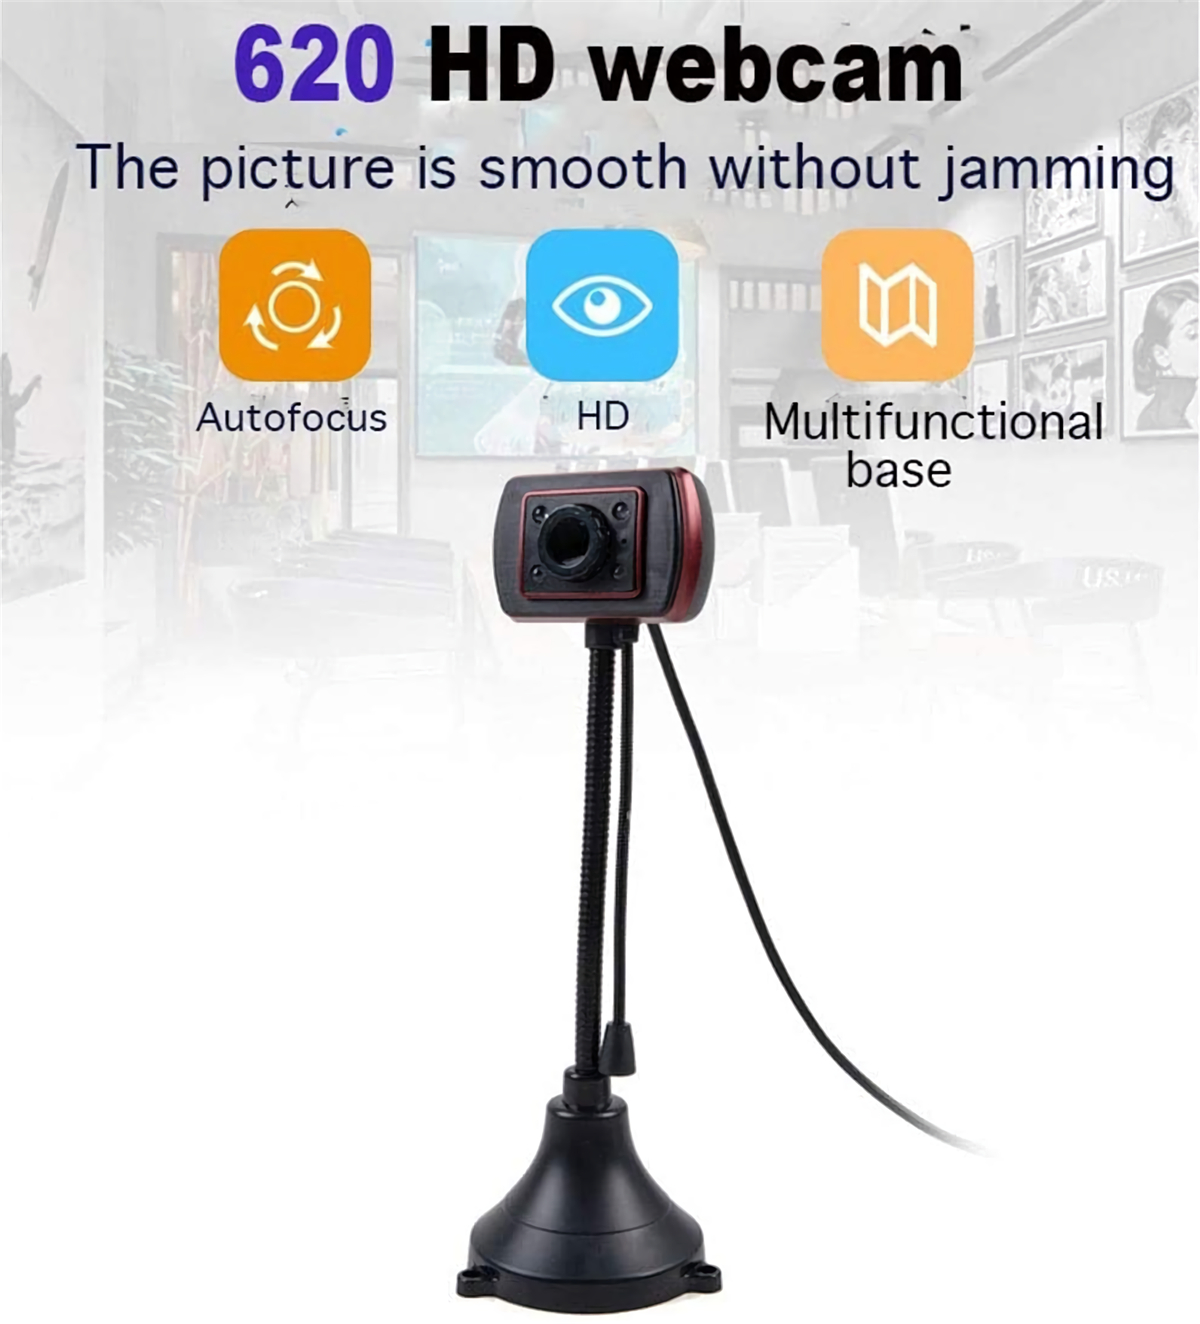 S620-480P-HD-Webcam-CMOS-USB-20-Wired-Computer-Web-Camera-Built-in-Microphone-Camera-for-Desktop-Com-1891978-1